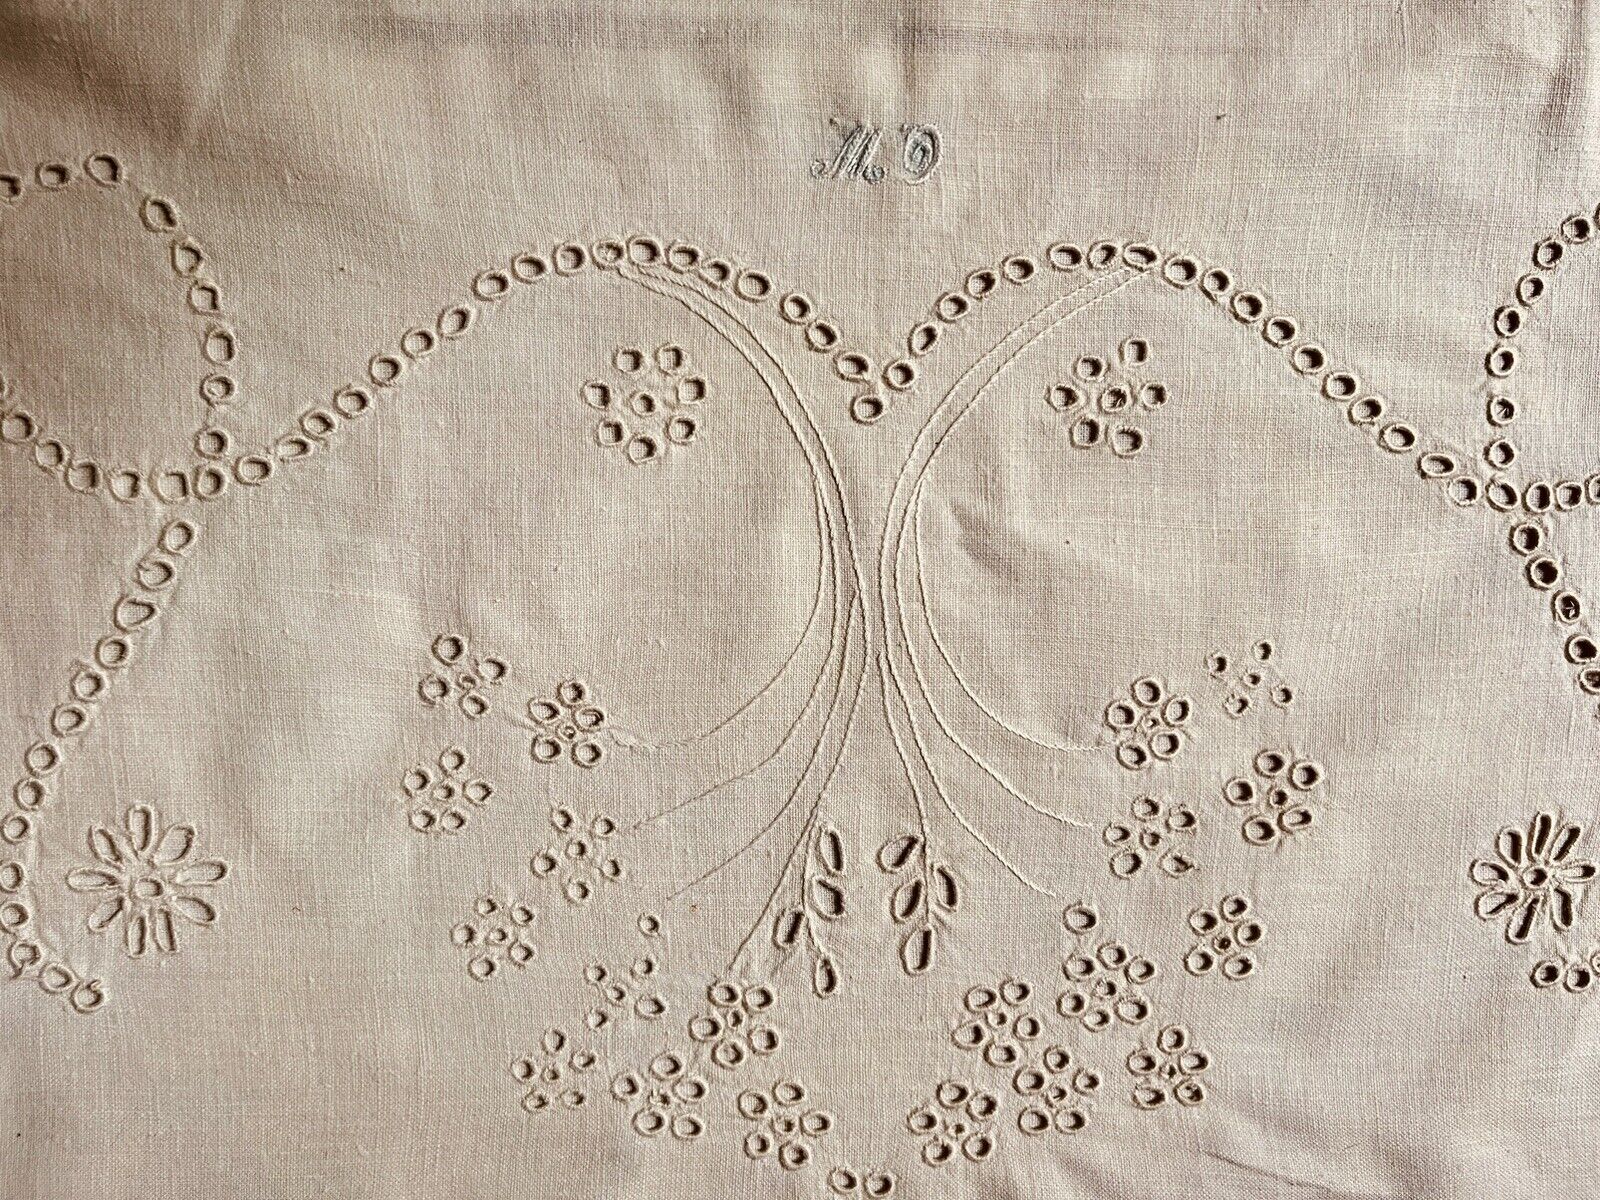 Antique Monogrammed Pillowcase Hand Made White Eeyelet Embroidery  15 x 19 1/2\